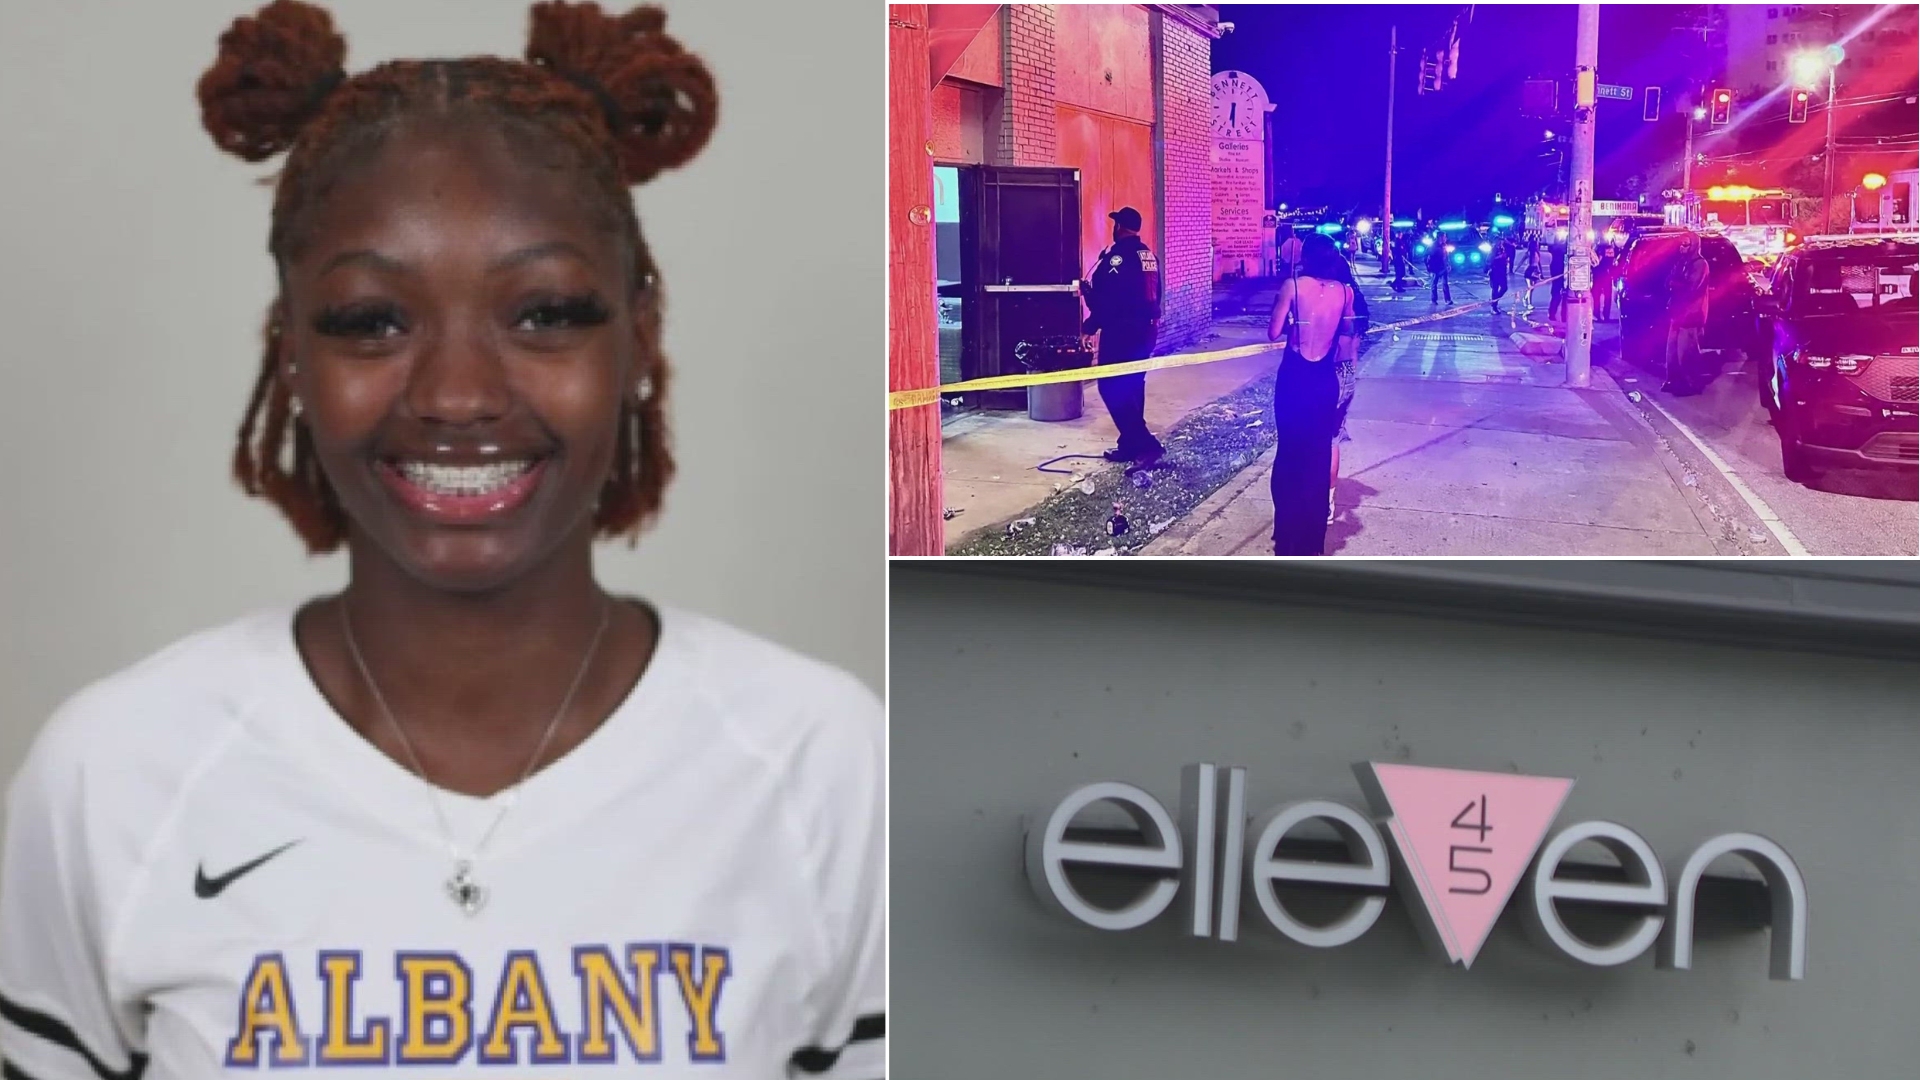 A third lawsuit has been filed over the shooting that killed two at Elleven45 Lounge on Mother's Day.